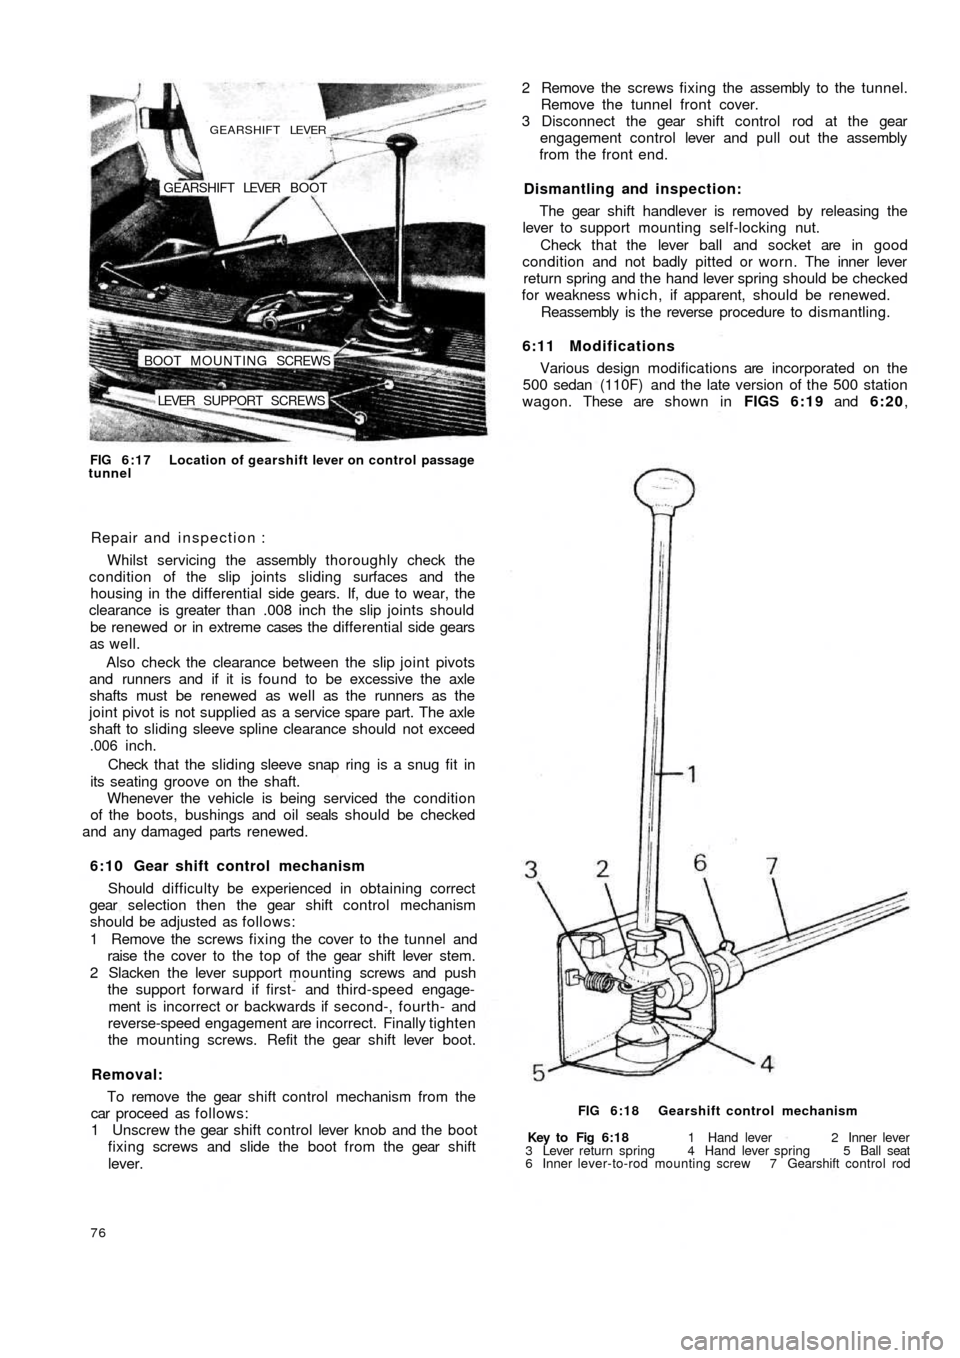 FIAT 500 1970 1.G Workshop Manual LEVER  SUPPORT SCREWS BOOT MOUNTING SCREWSGEARSHIFT LEVER  BOOT
GEARSHIFT LEVER
FIG 6:17 Location of gearshift lever on control  passage
tunnel
Repair and inspection :
Whilst servicing the assembly th